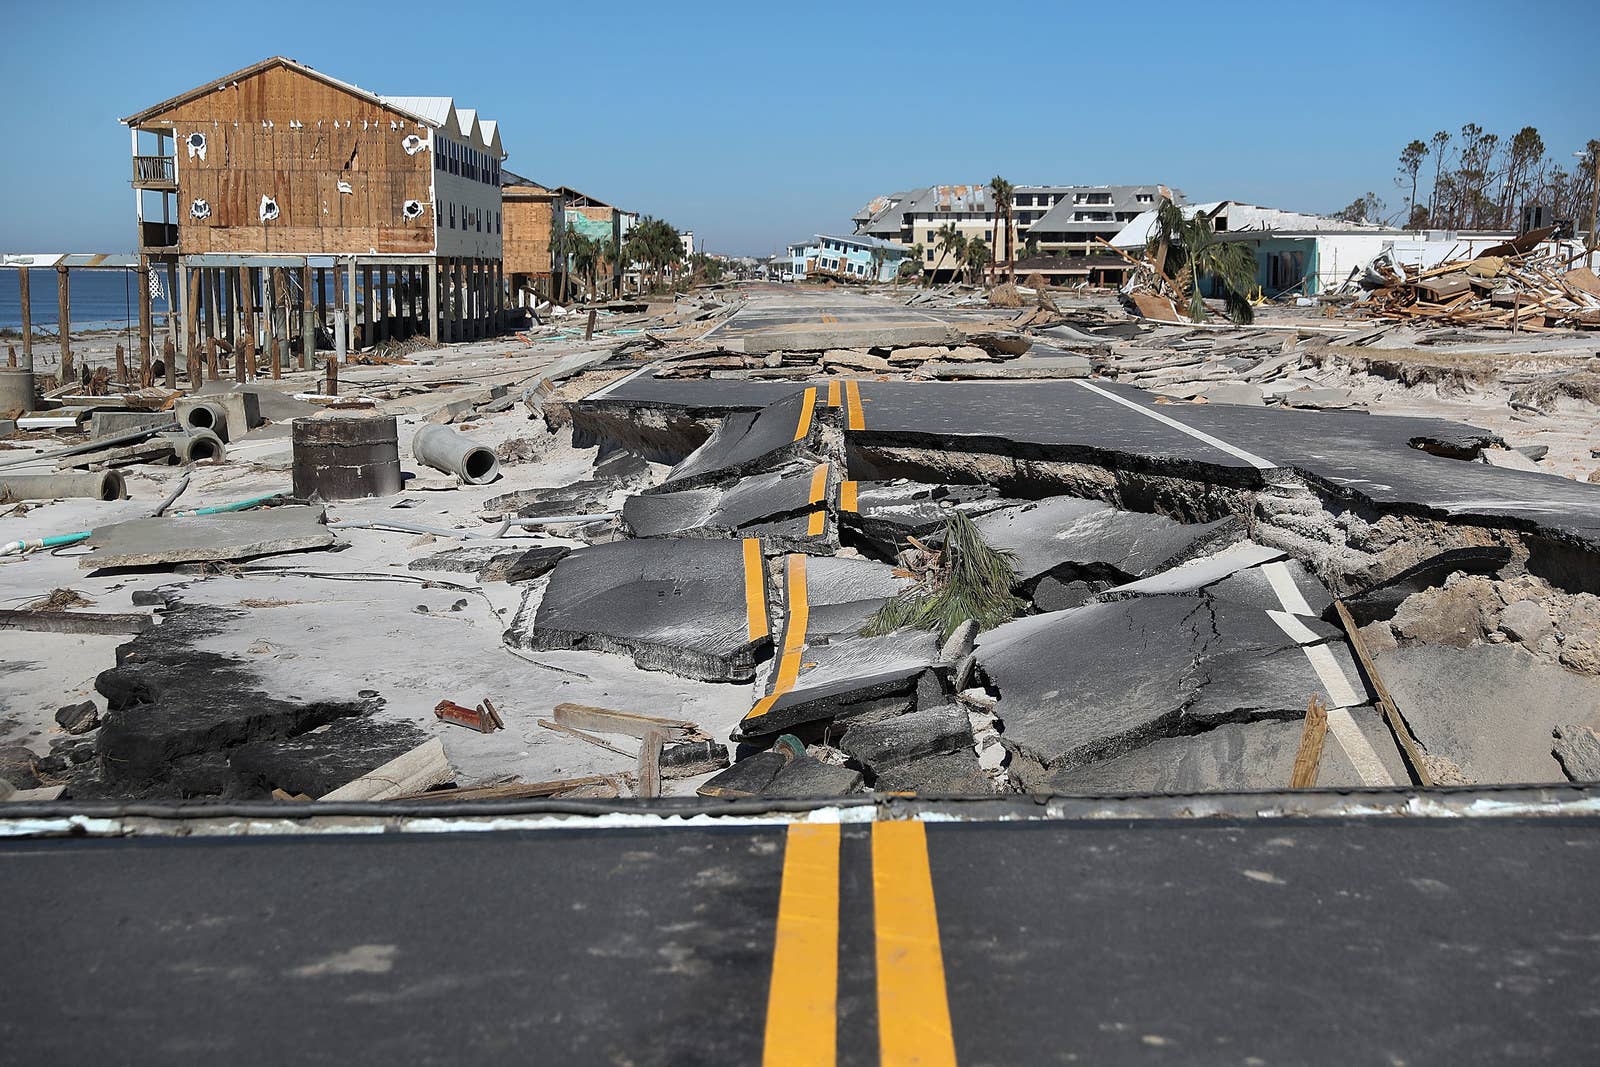 Route 98 in Mexico Beach, Florida, was decimated after Hurricane Michael passed through the area in October.